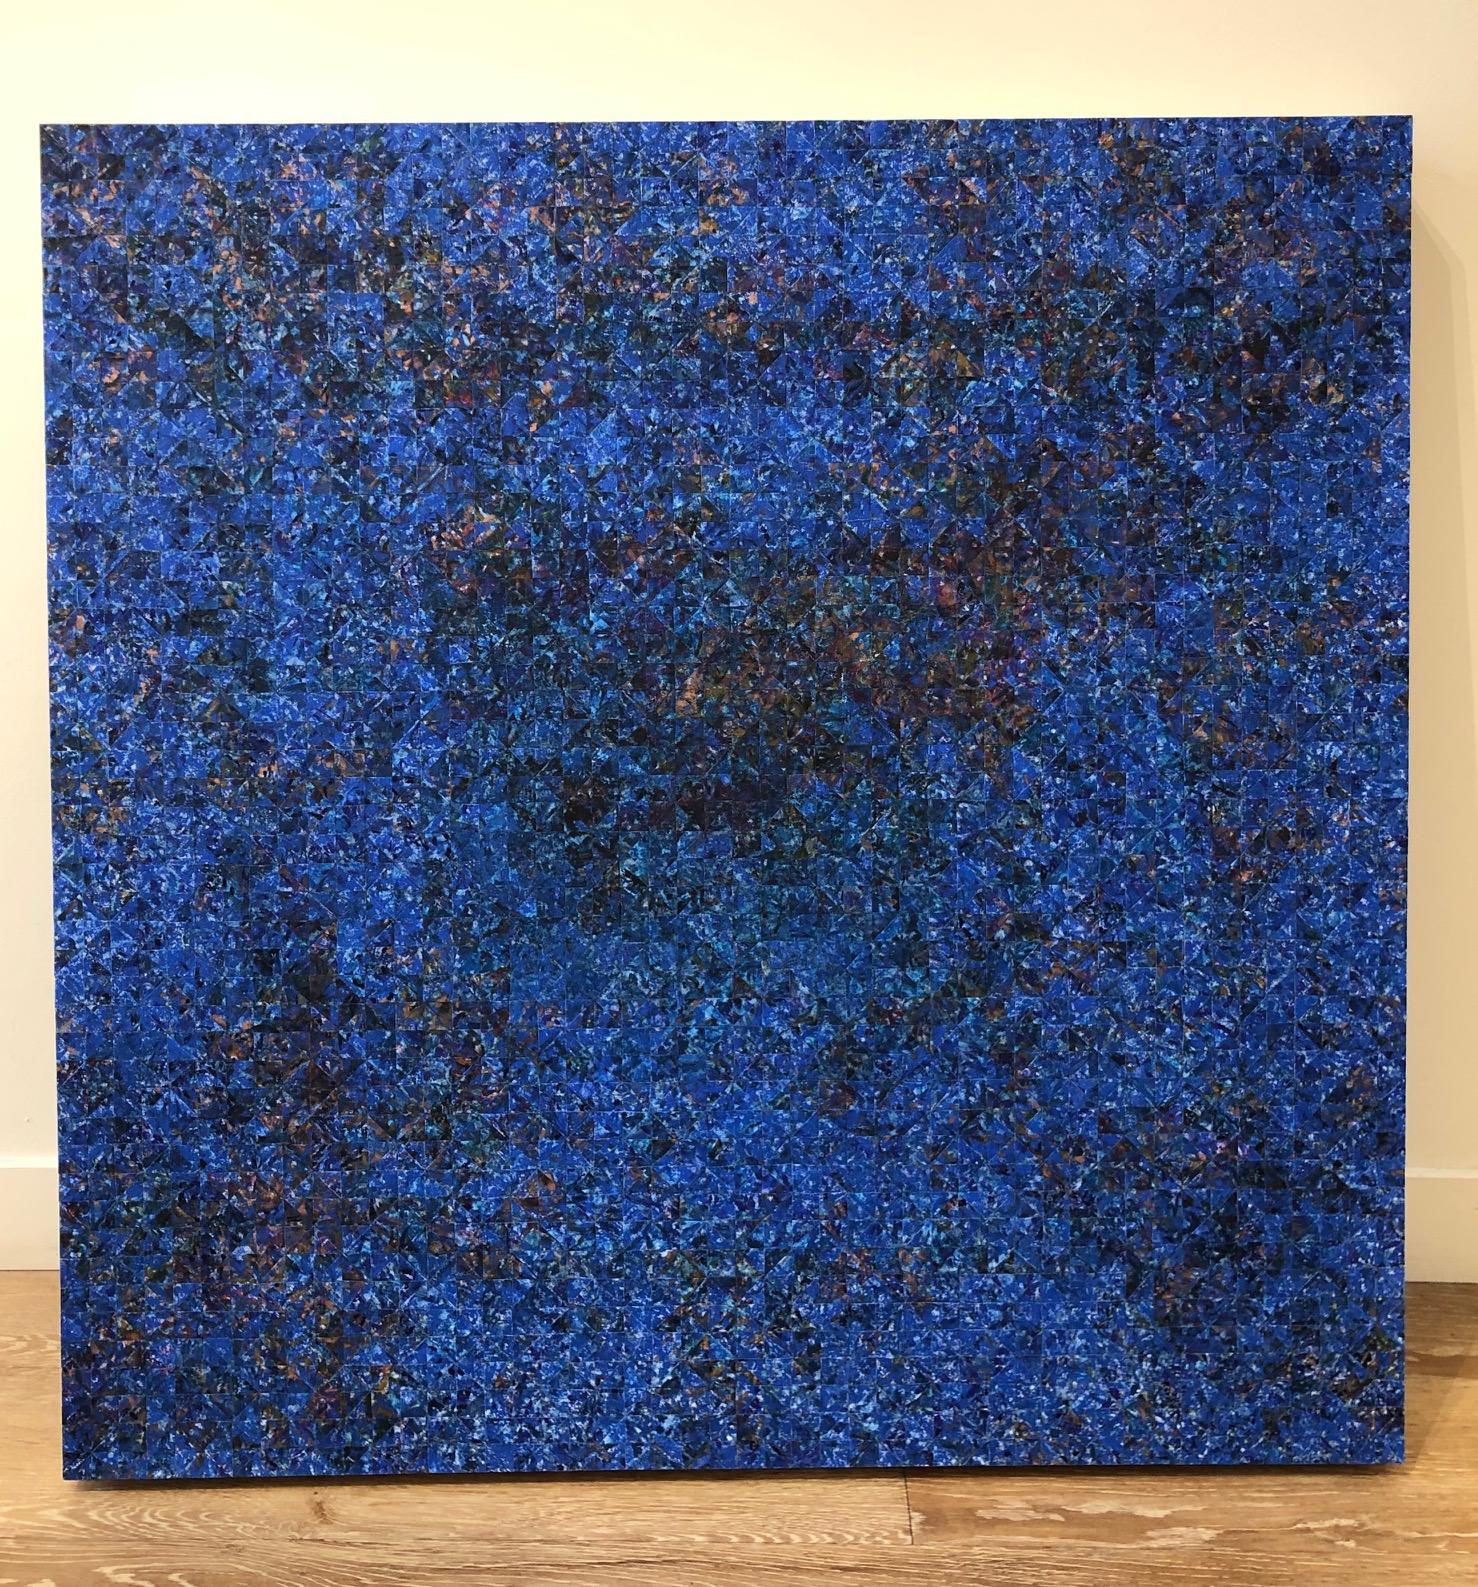 Nocturne at One / Blue contemporary geometric mosaic painting on wood panel - Art by Irene Zweig